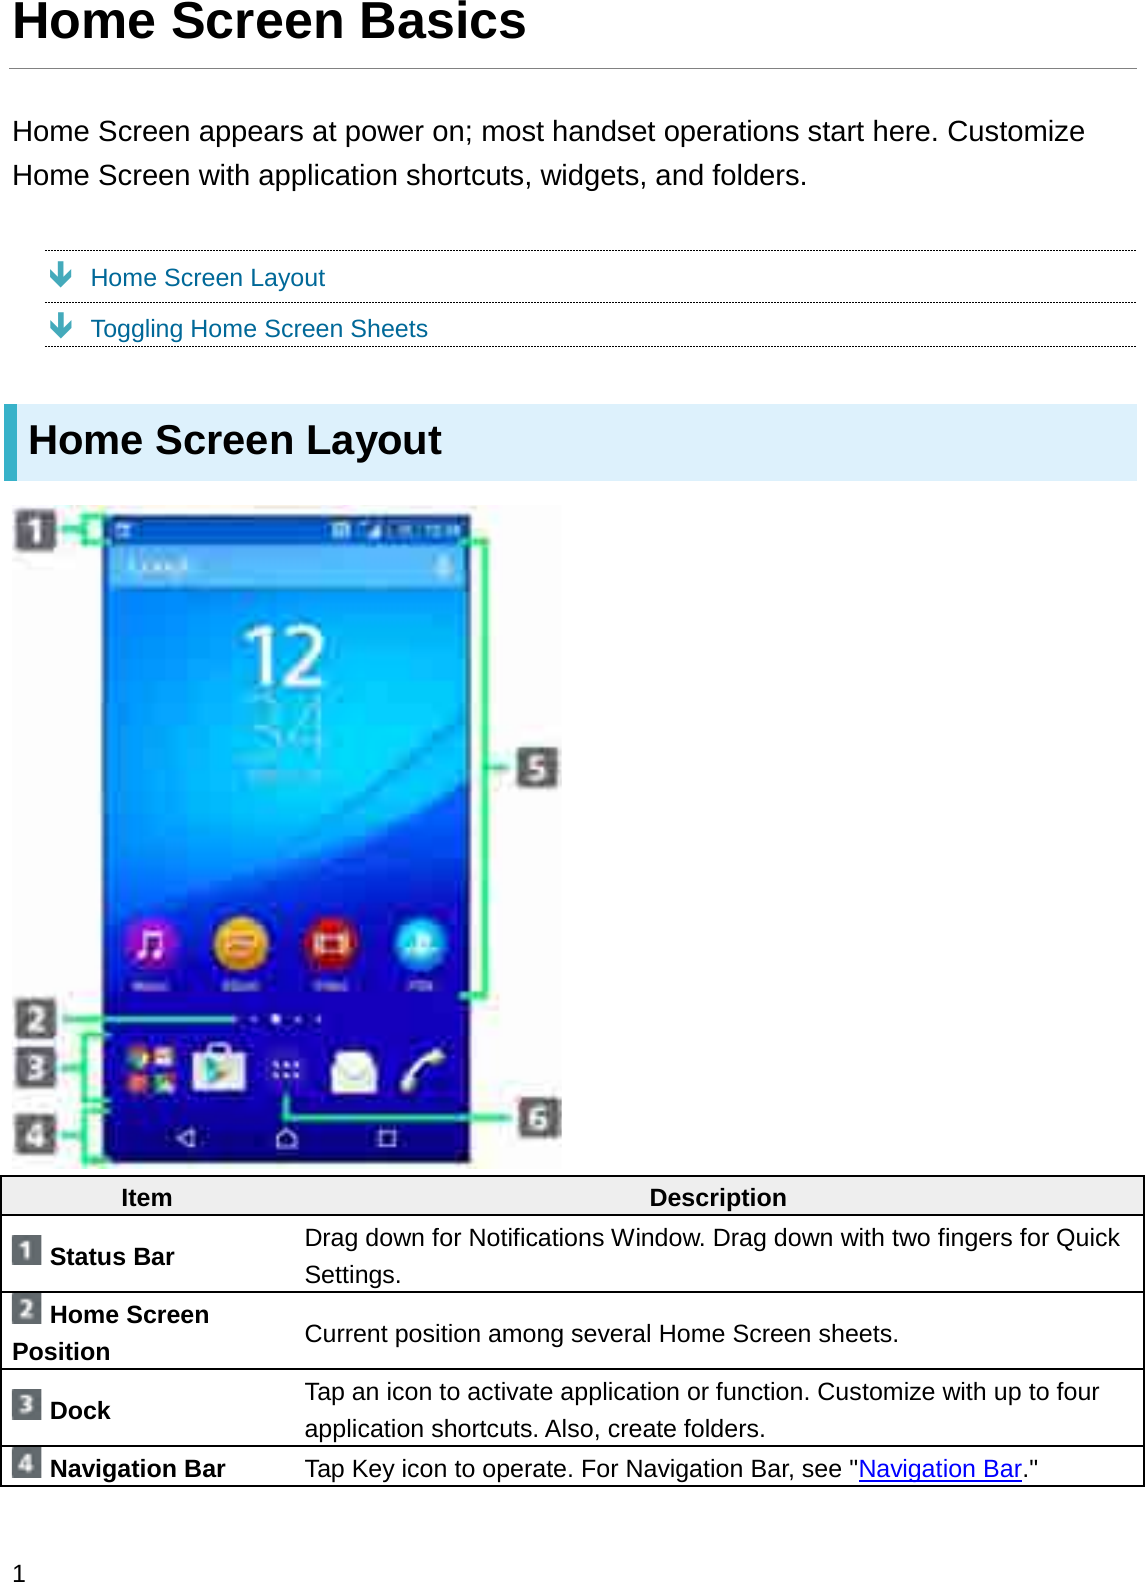 Home Screen BasicsHome Screen appears at power on; most handset operations start here. Customize Home Screen with application shortcuts, widgets, and folders.ÐHome Screen LayoutÐToggling Home Screen SheetsHome Screen LayoutItem DescriptionStatus Bar Drag down for Notifications Window. Drag down with two fingers for Quick Settings.Home Screen Position Current position among several Home Screen sheets.Dock Tap an icon to activate application or function. Customize with up to four application shortcuts. Also, create folders.Navigation Bar Tap Key icon to operate. For Navigation Bar, see &quot;Navigation Bar.&quot;1